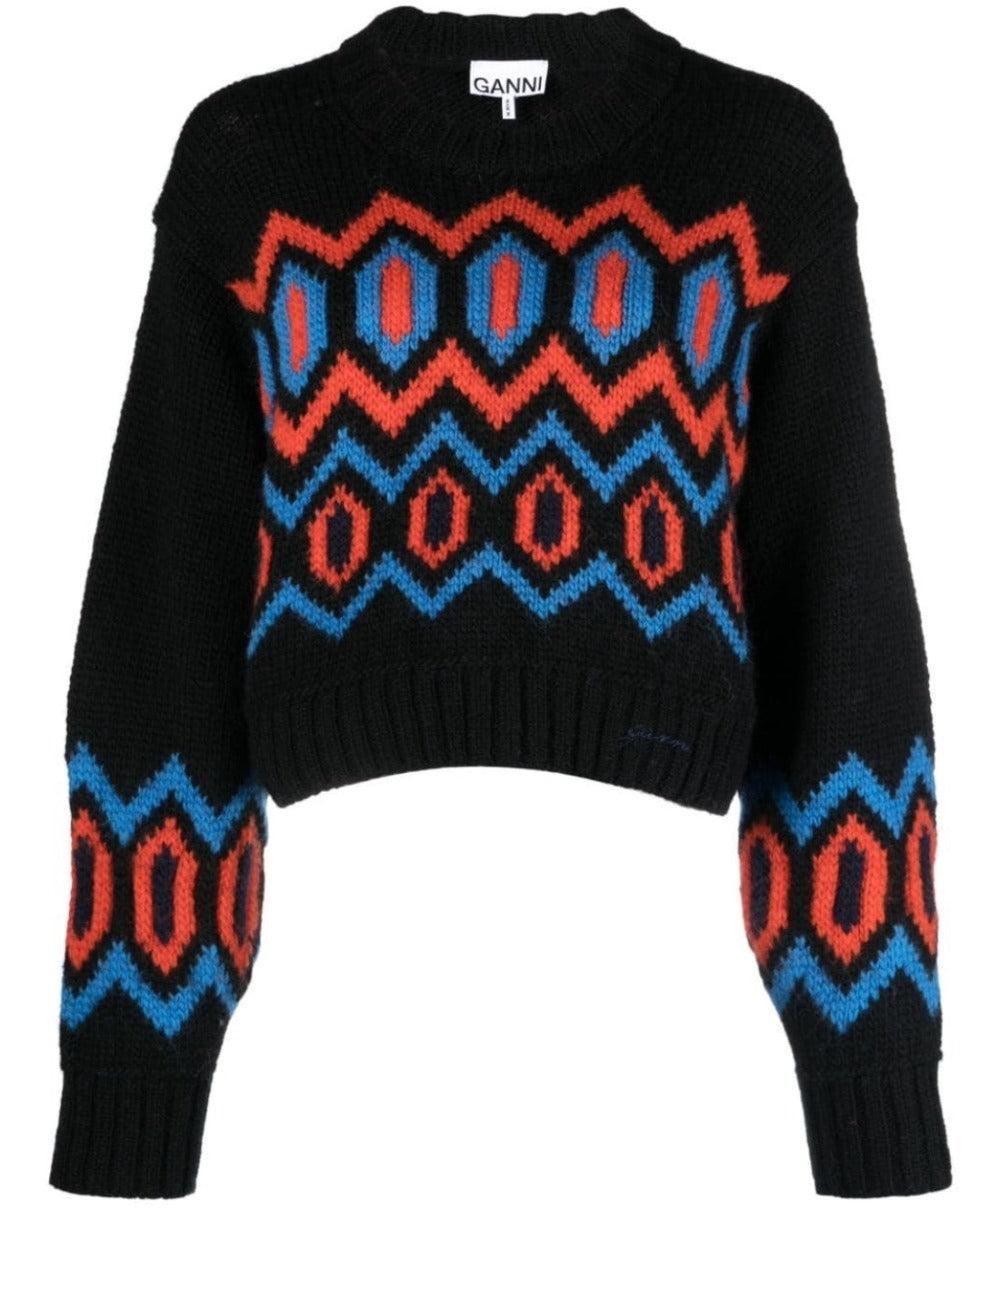 GANNI CHUNKY GRAPHIC CROP ONECK